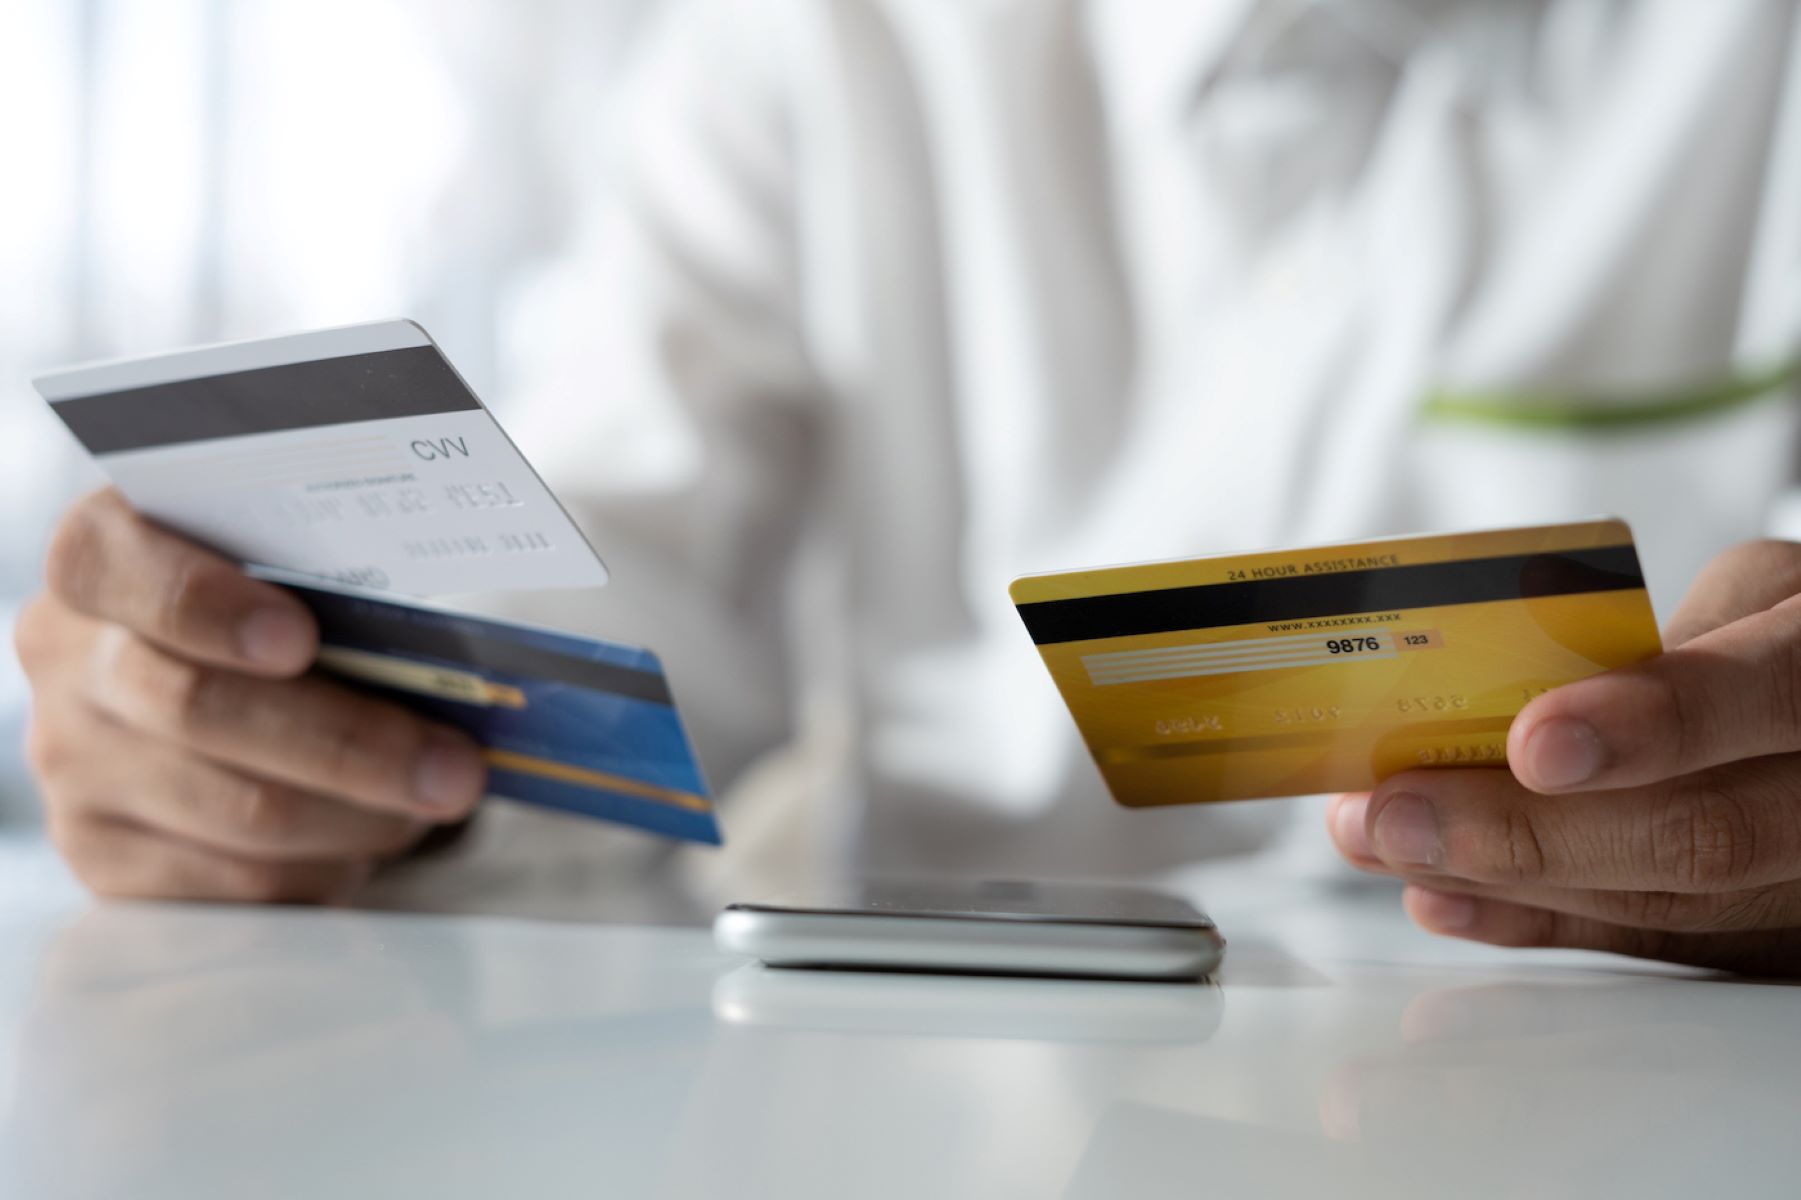 Which Type Of Credit Card Carries The Most Risk?